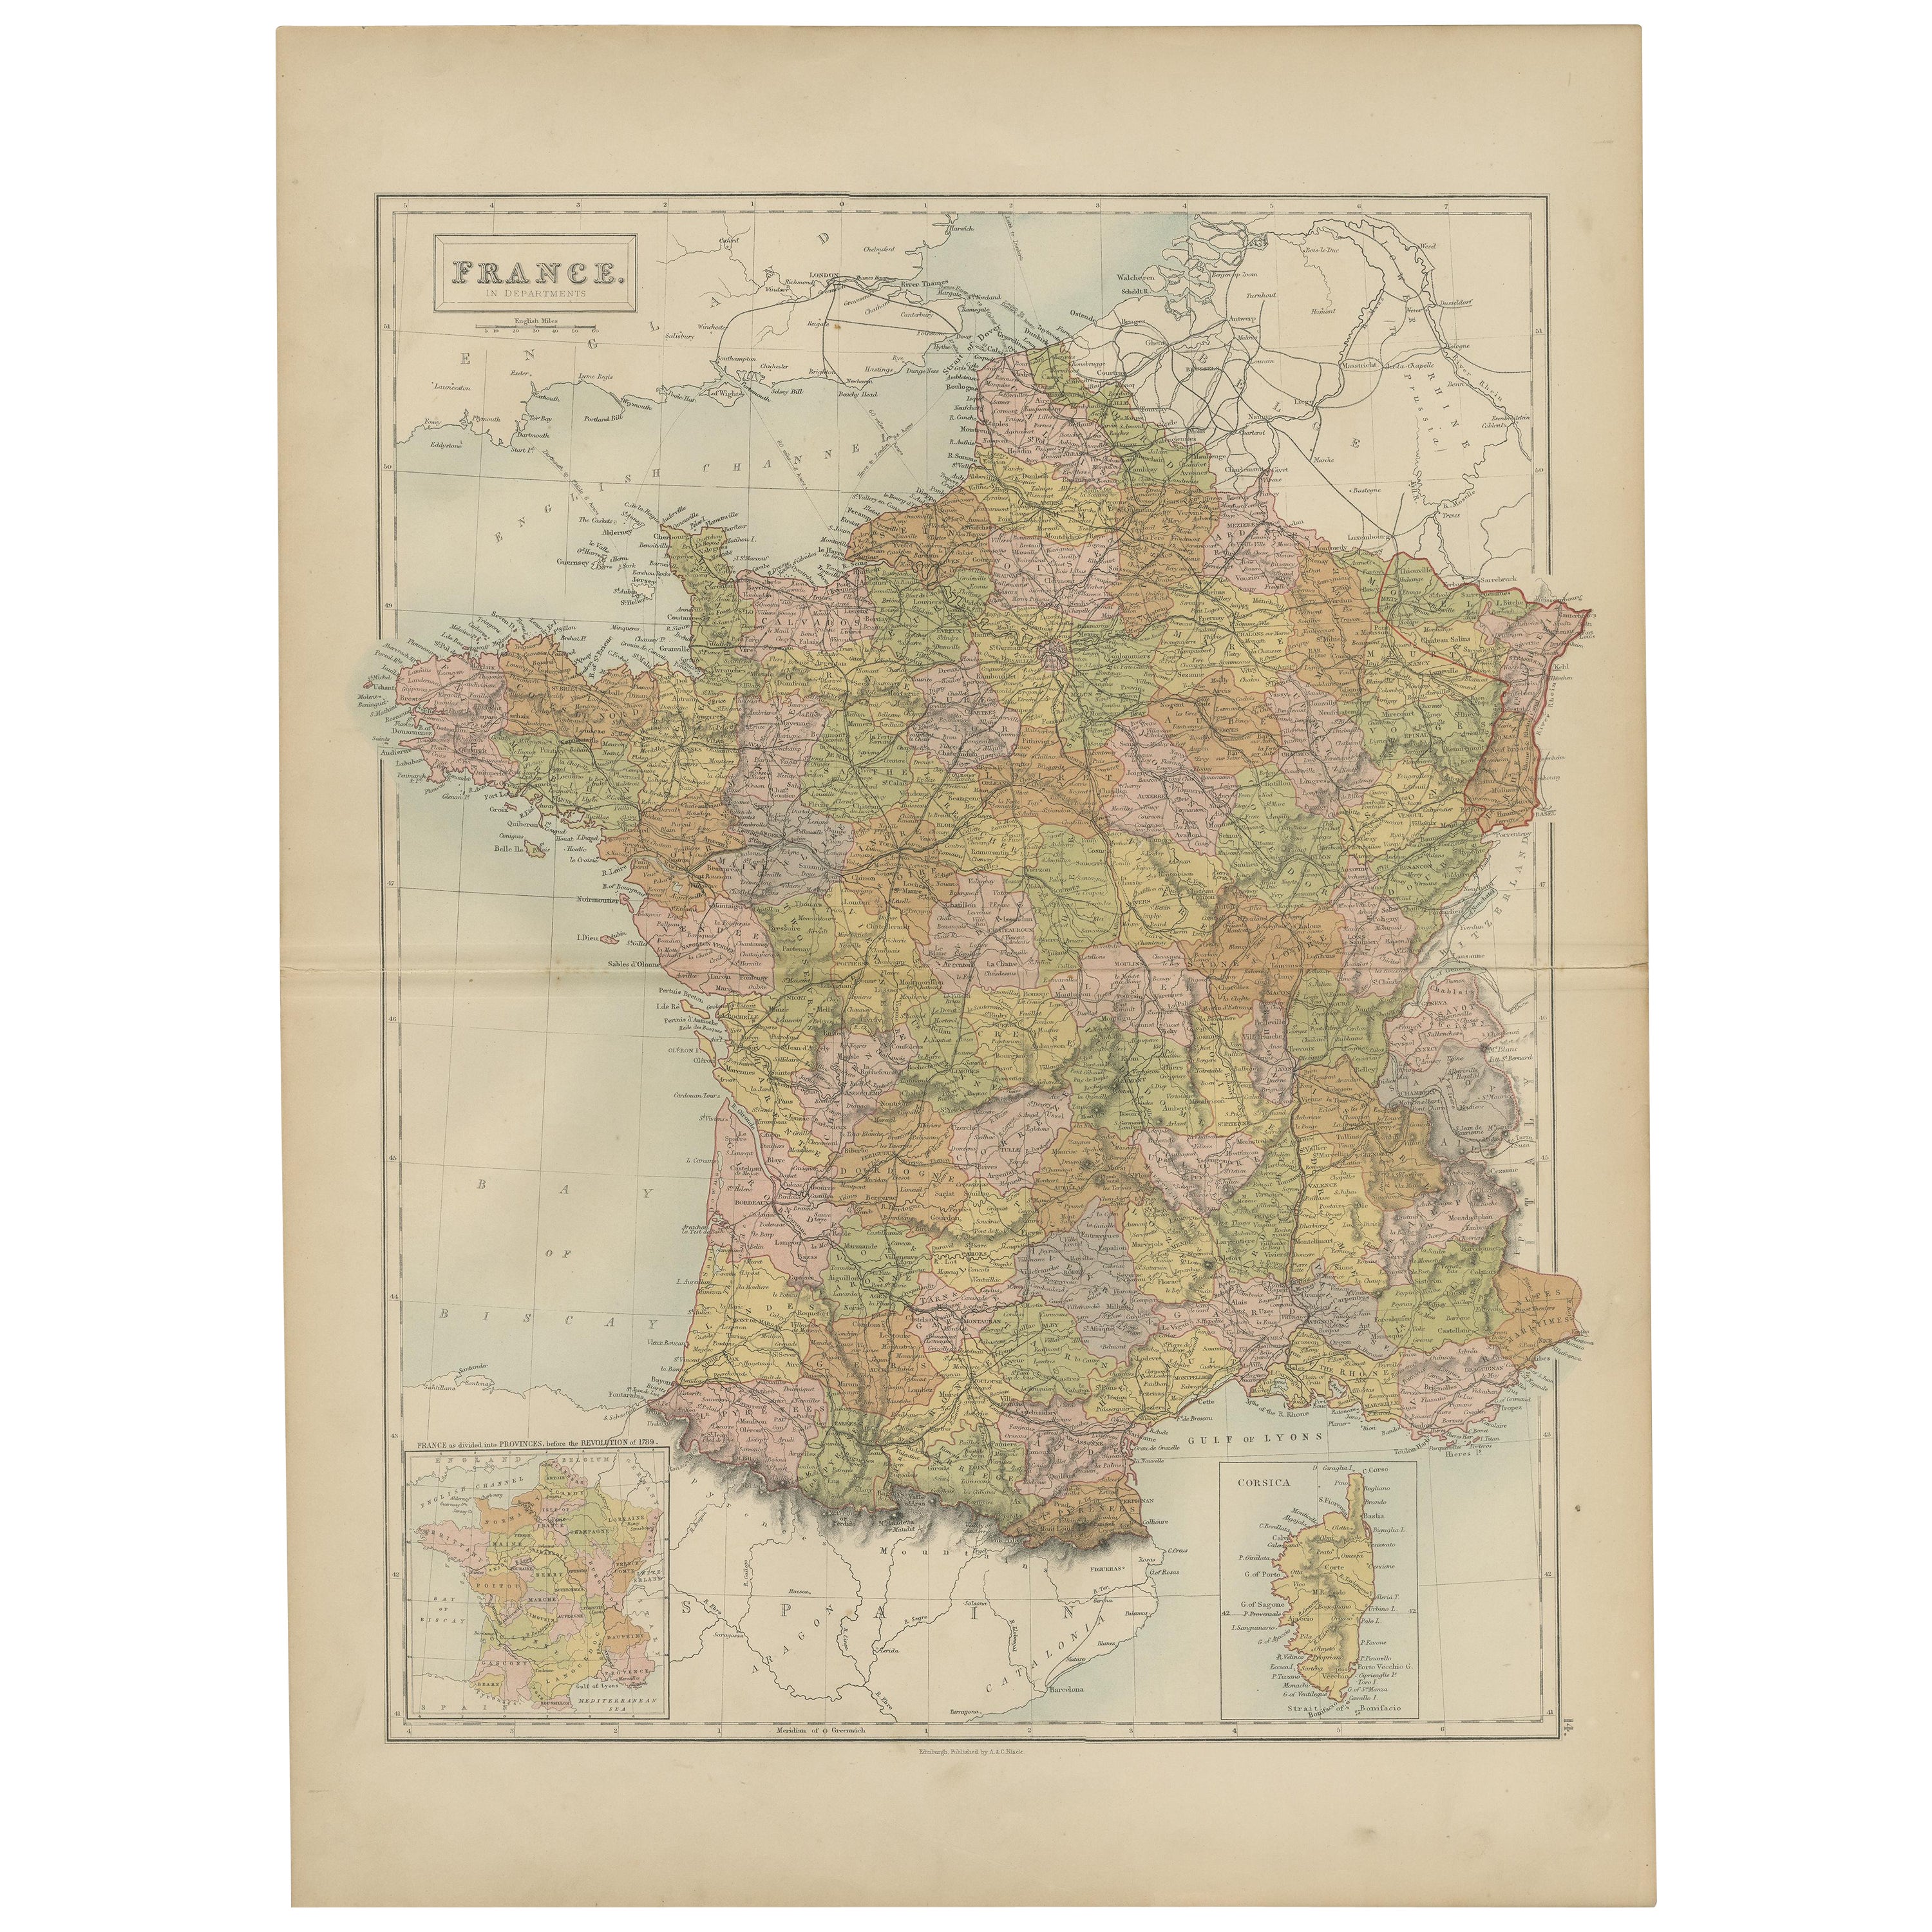 Antique Map of France by A & C. Black, 1870